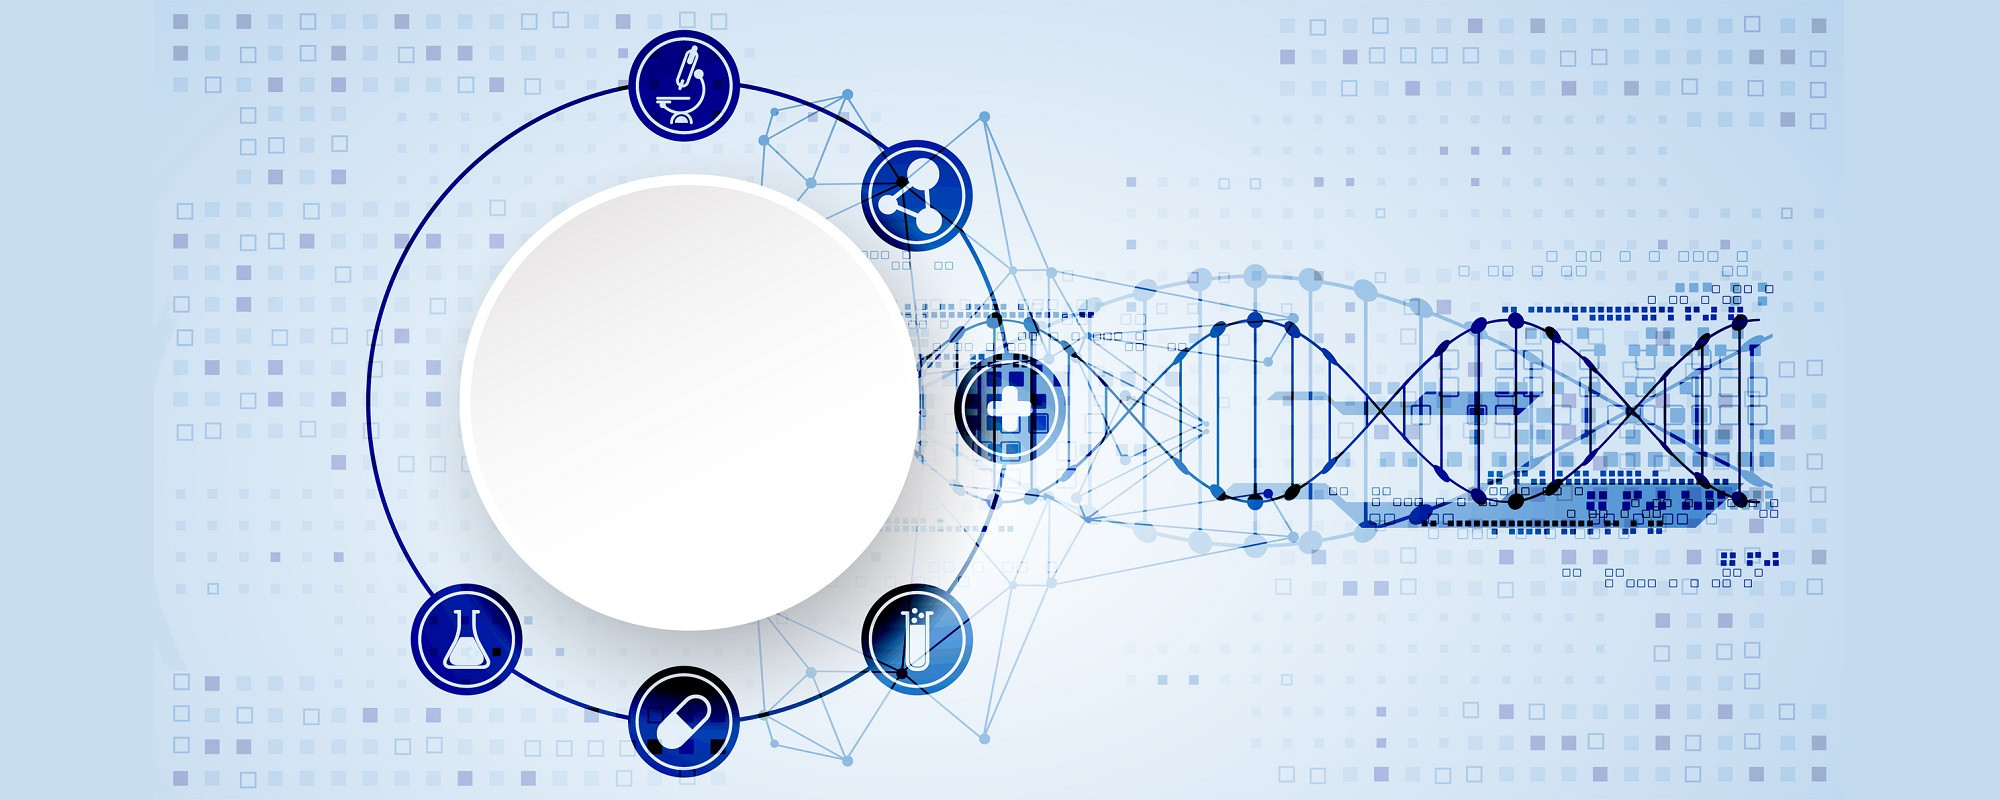 Multi-platform Next Generation Sequencing for Cancer Diagnostics: Research Outlook